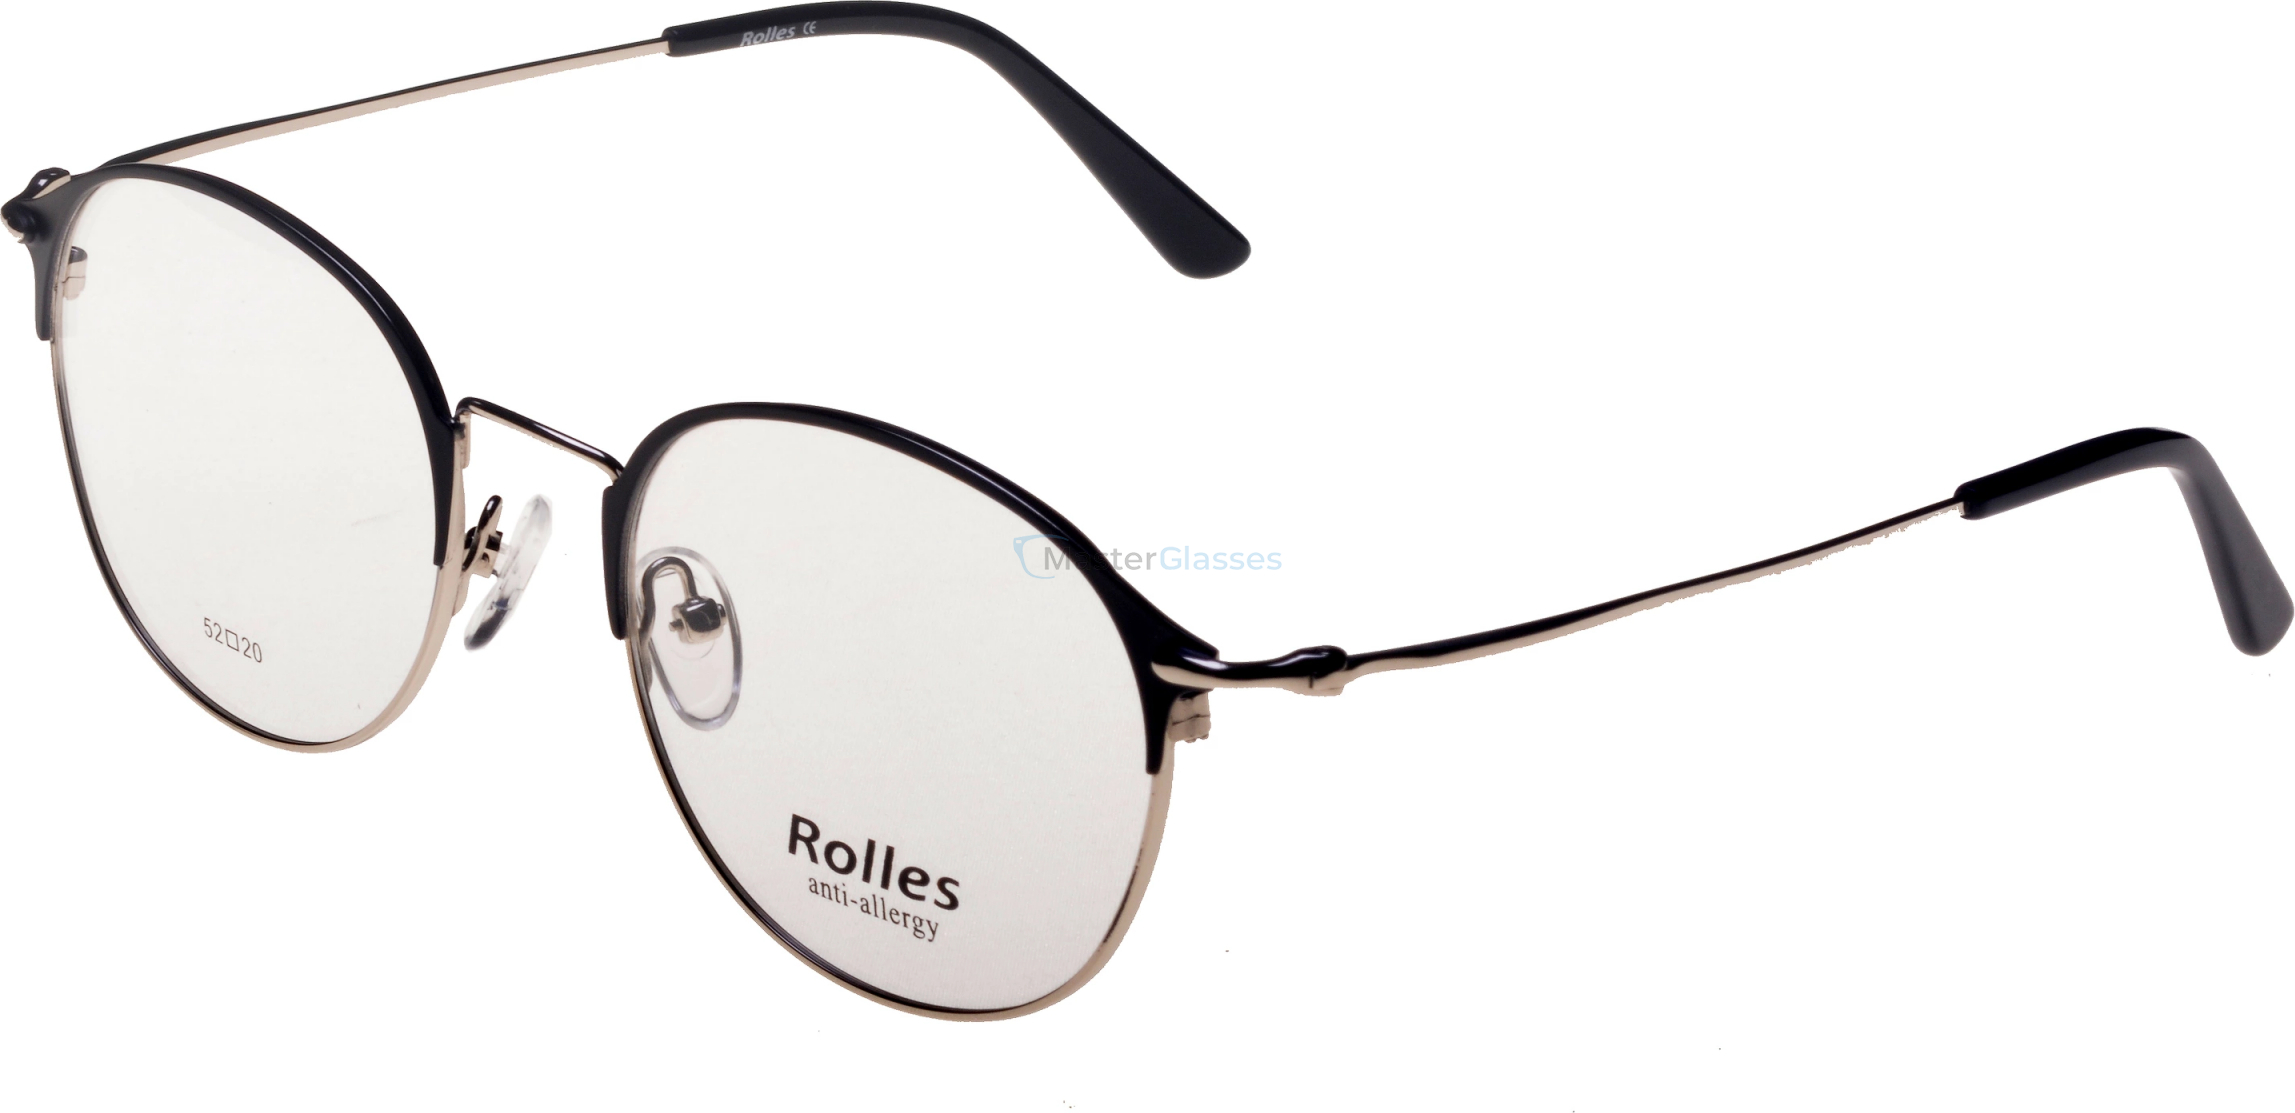  Rolles 670 01